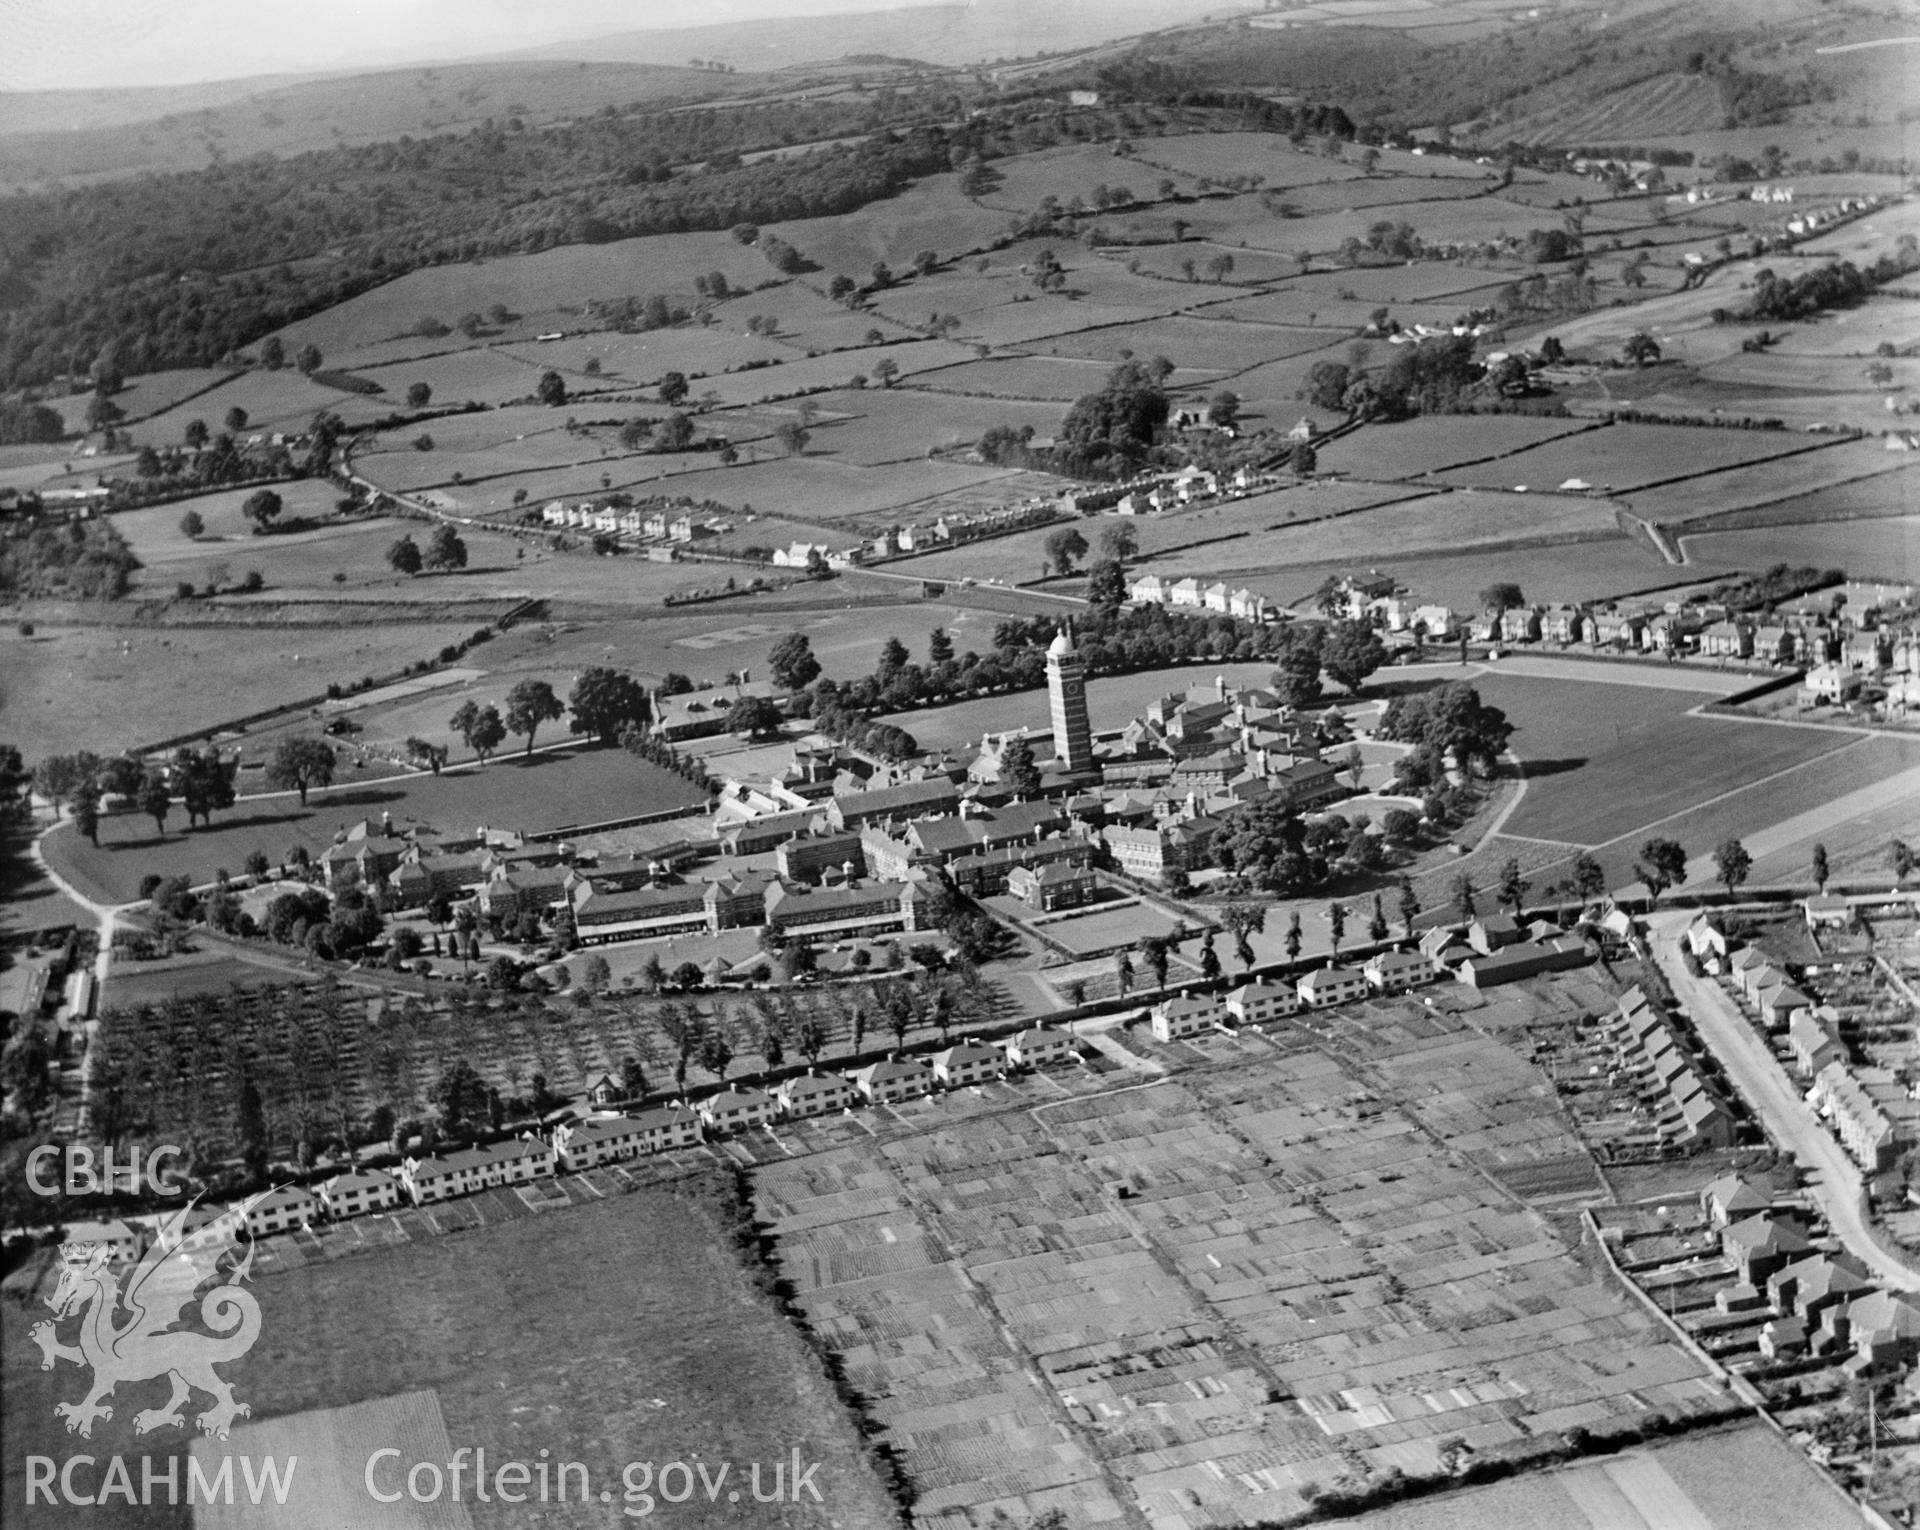 View of Cardiff City Mental Hospital, Whitchurch, showing Whitchurch housing and allotments, oblique aerial view. 5?x4? black and white glass plate negative.